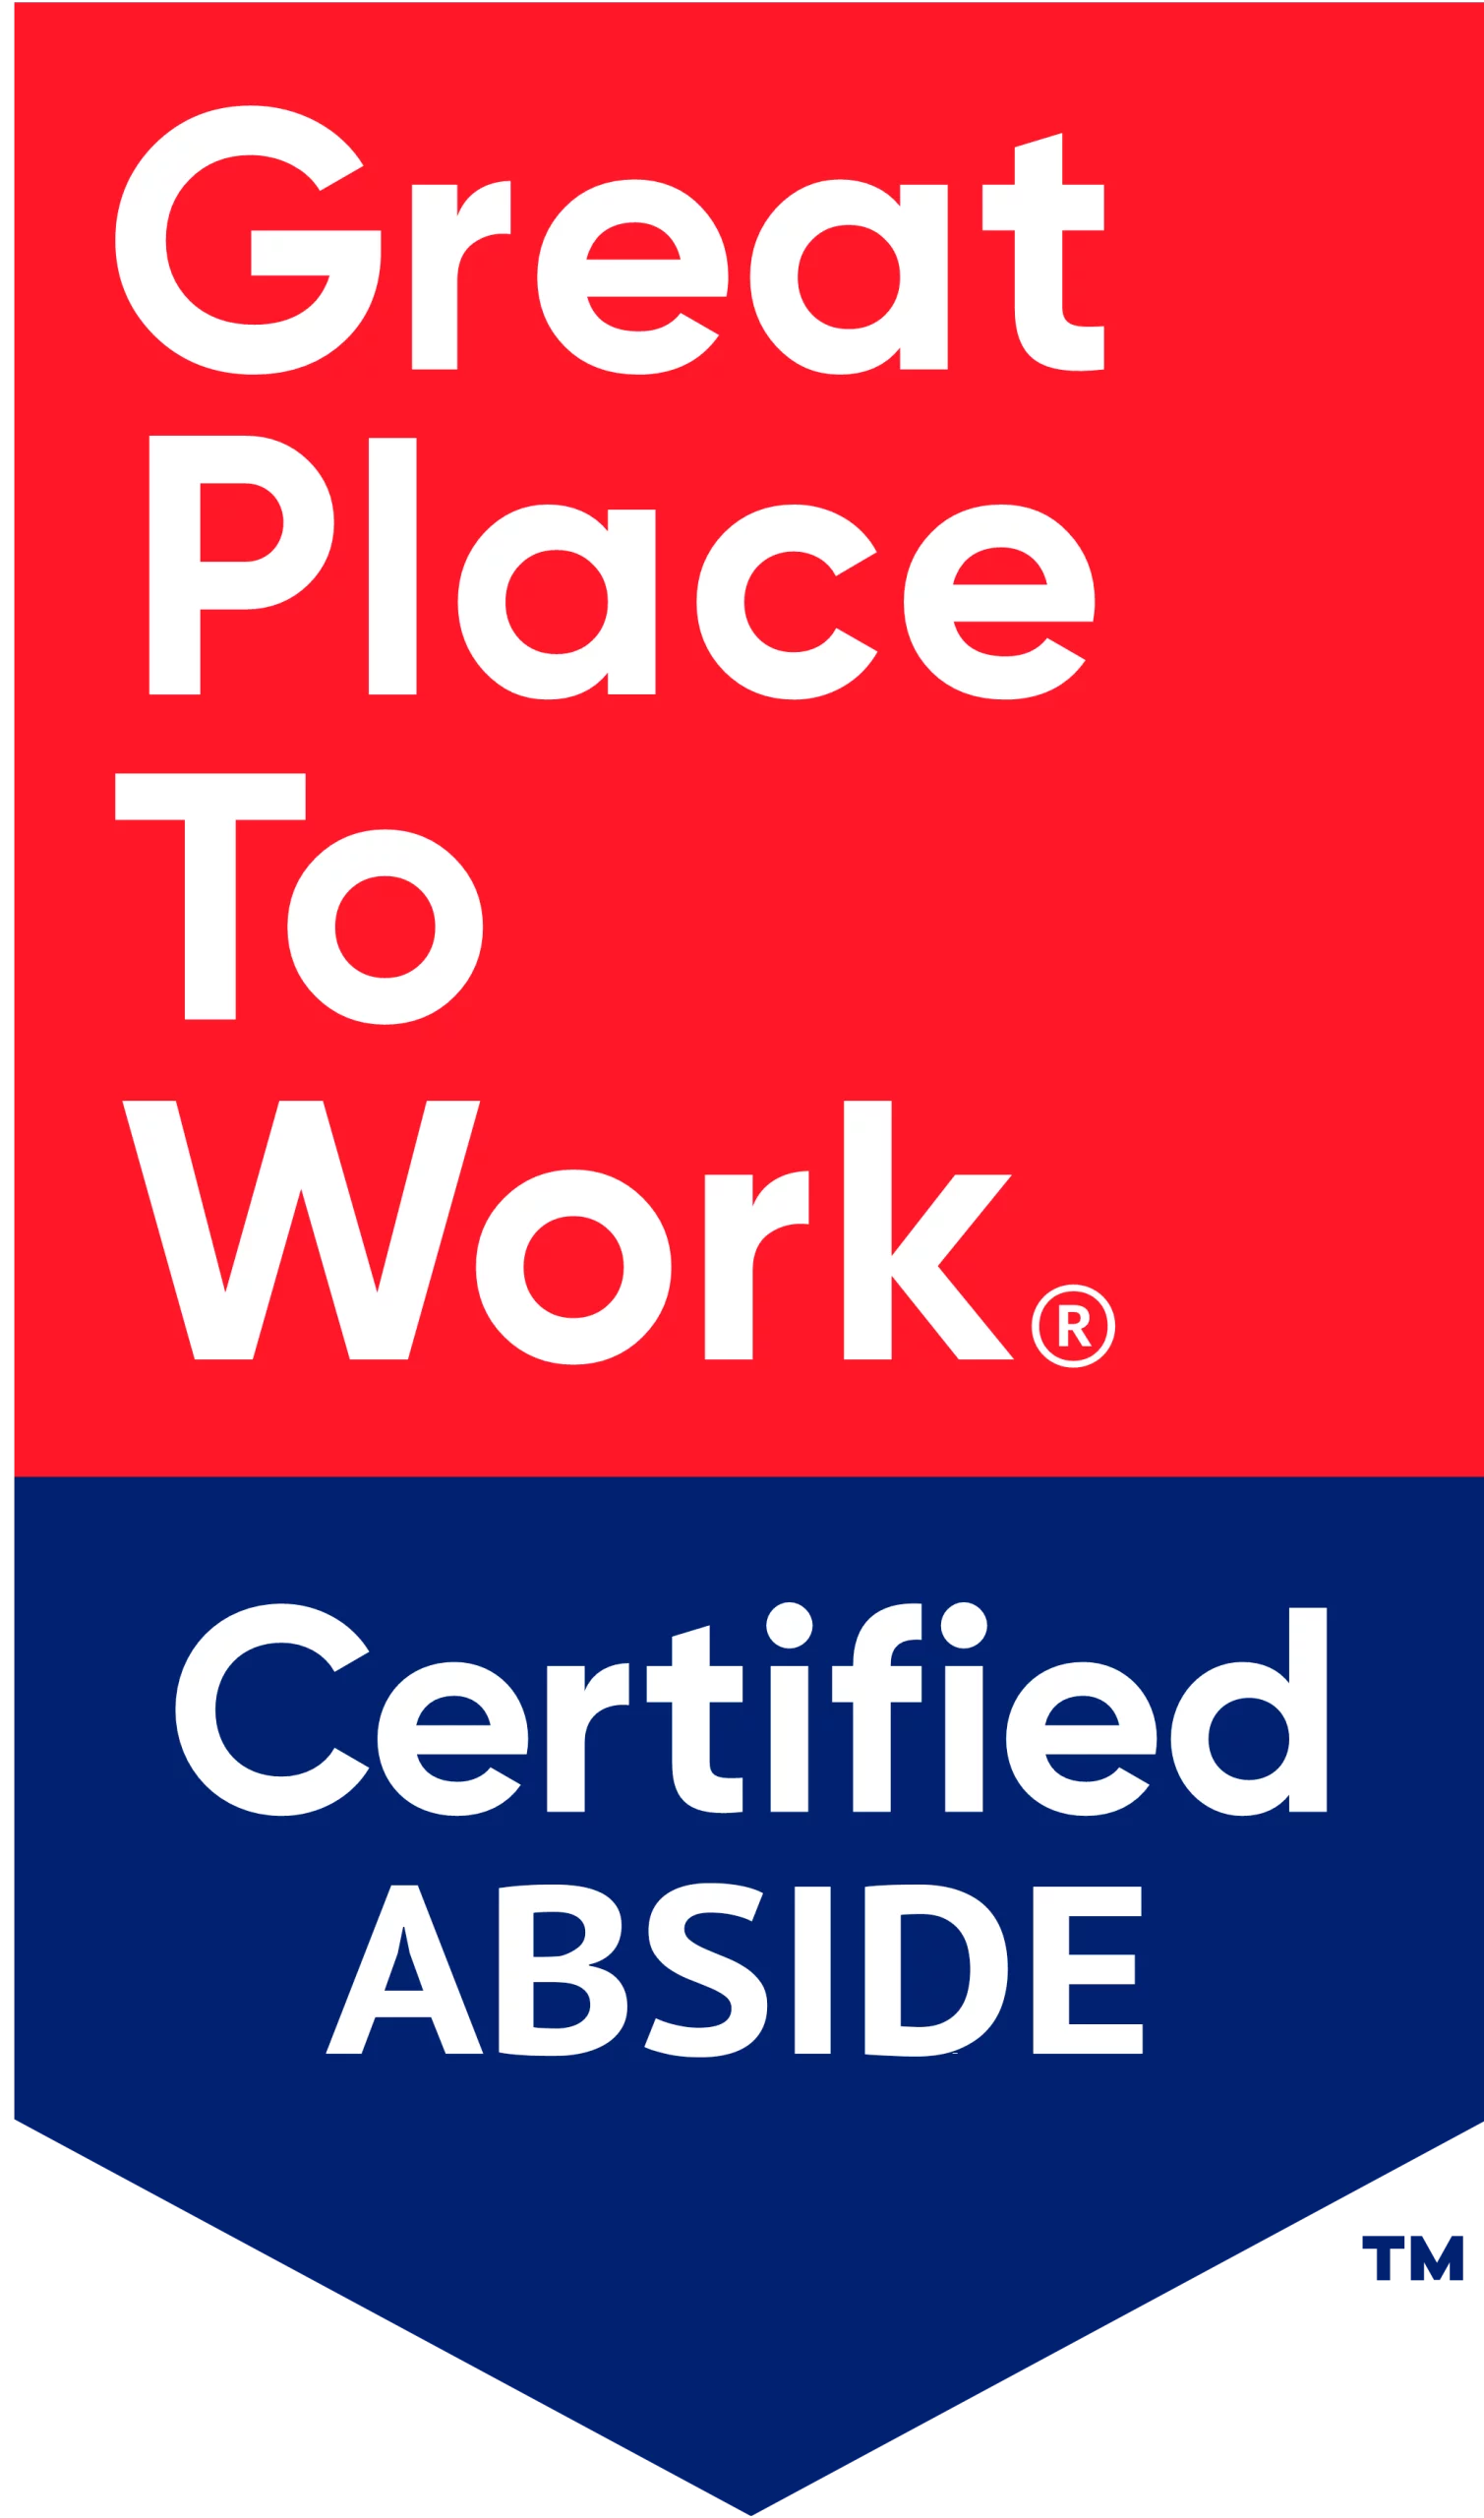 ¡SOMOS GREAT PLACE TO WORK!